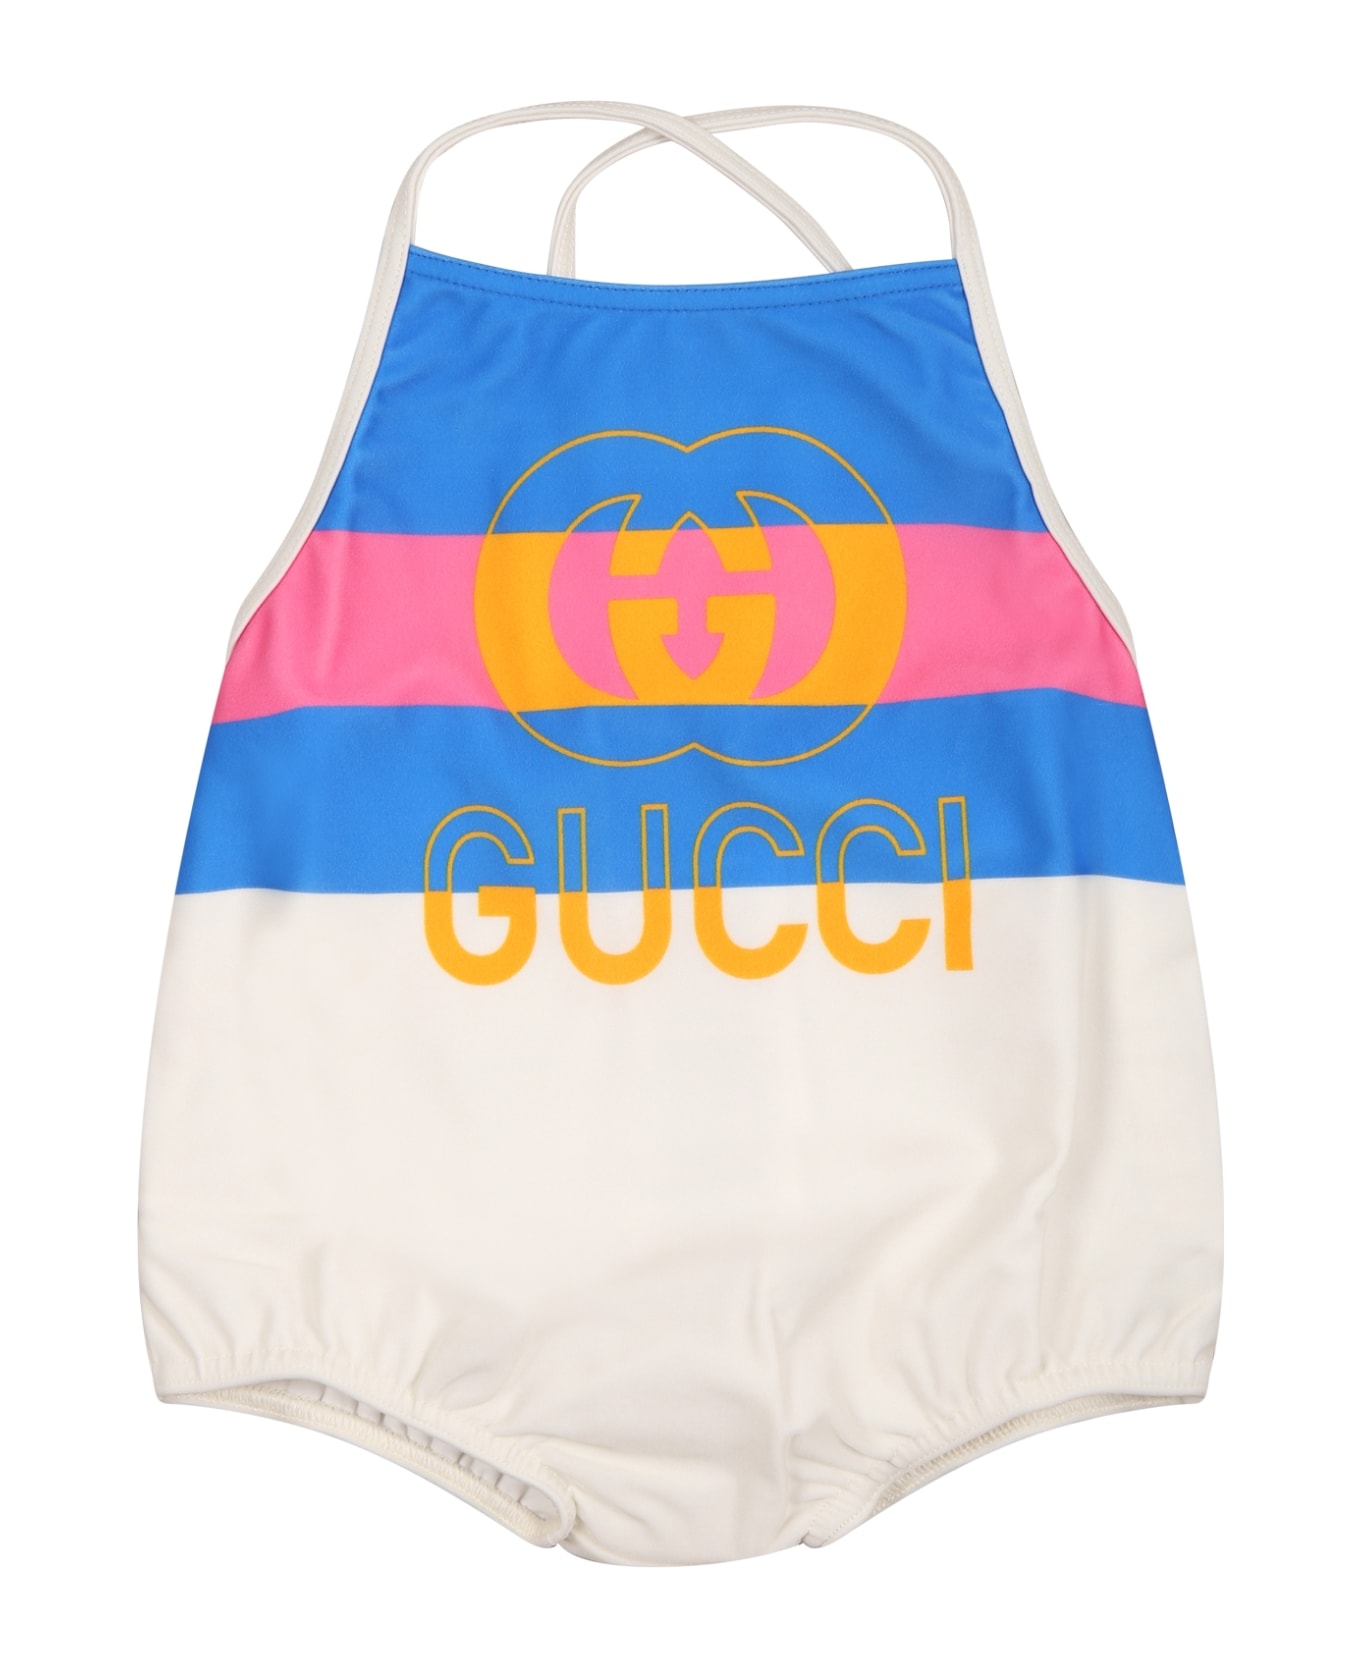 Gucci lined Ivory Swimssuit For Baby Girl With Vinatge Print And Iconic Double Gg - Multicolor